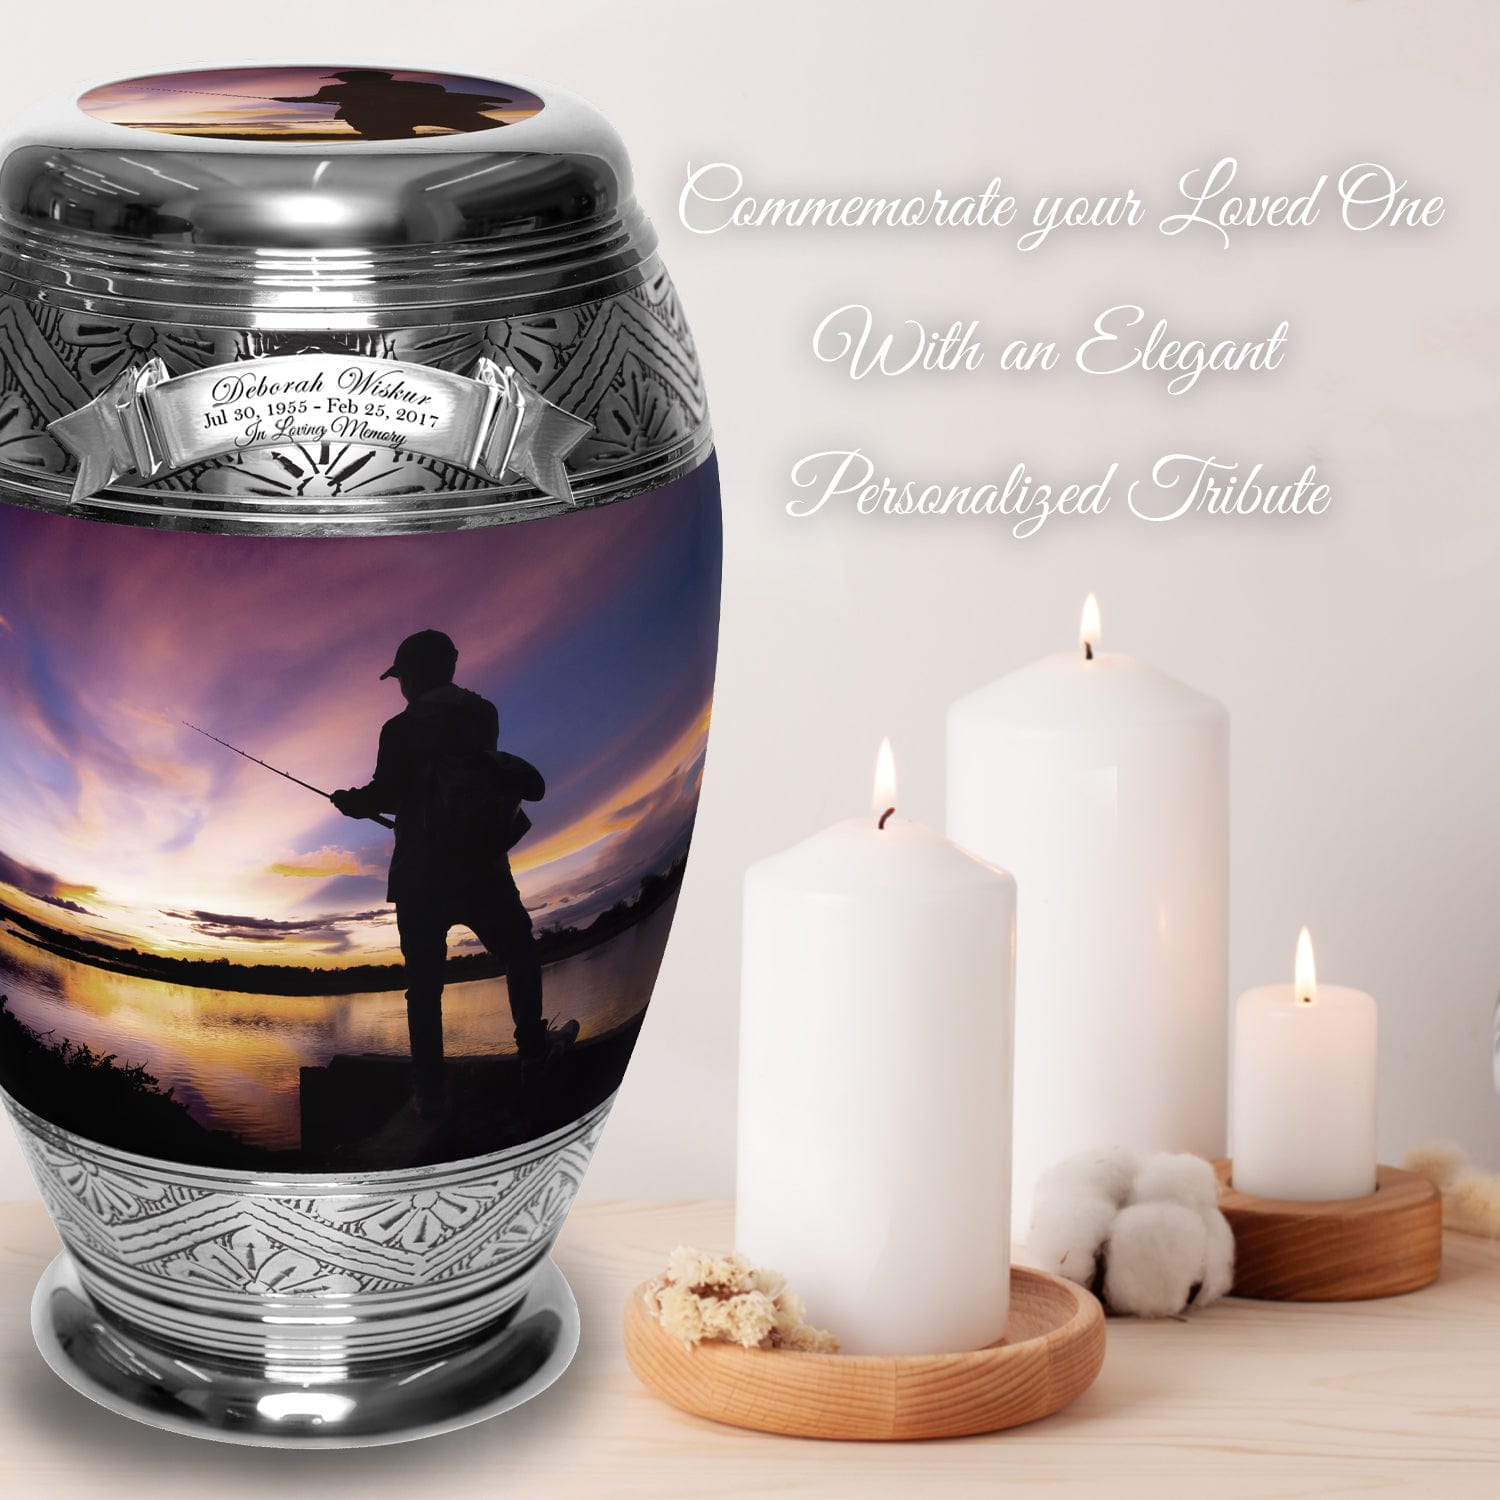 21 Best Fishing Memorial Gifts & Tributes » Urns